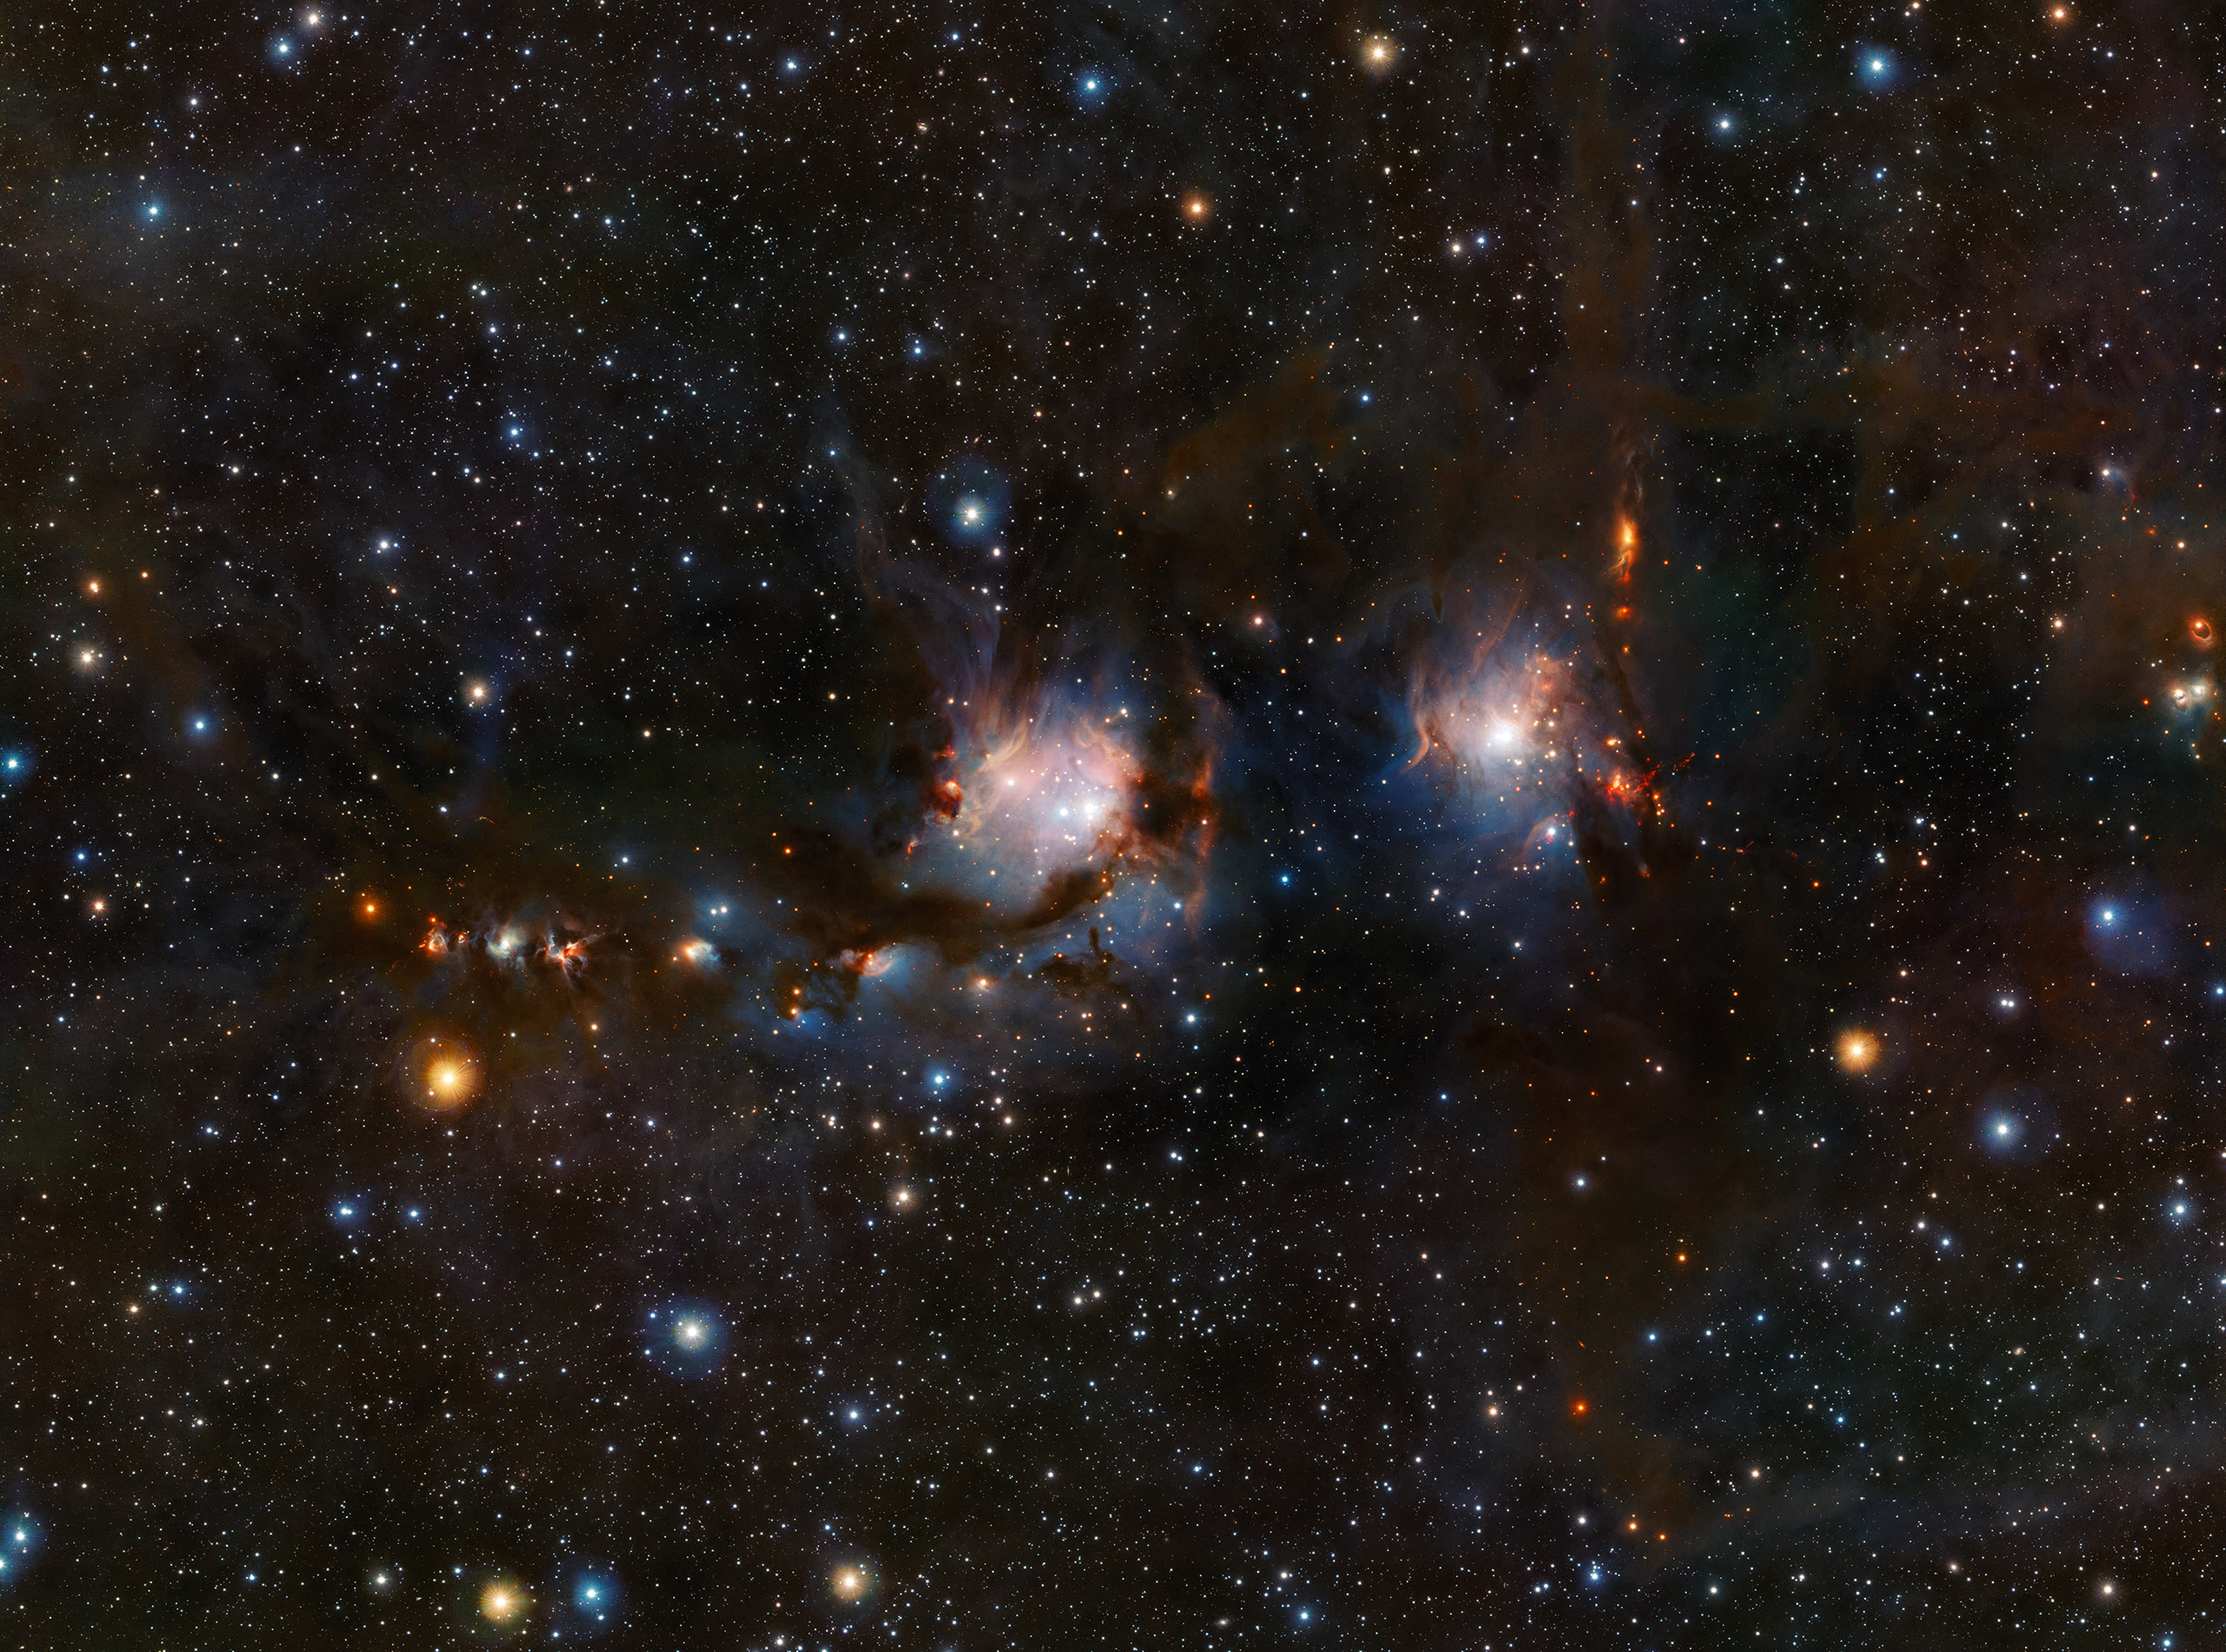 The star formation region, Messier 78, in the constellation of Orion (The Hunter), was taken with the VISTA infrared survey telescope at ESO’s Paranal Observatory in Chile and released on Oct. 5, 2016. (ESO)